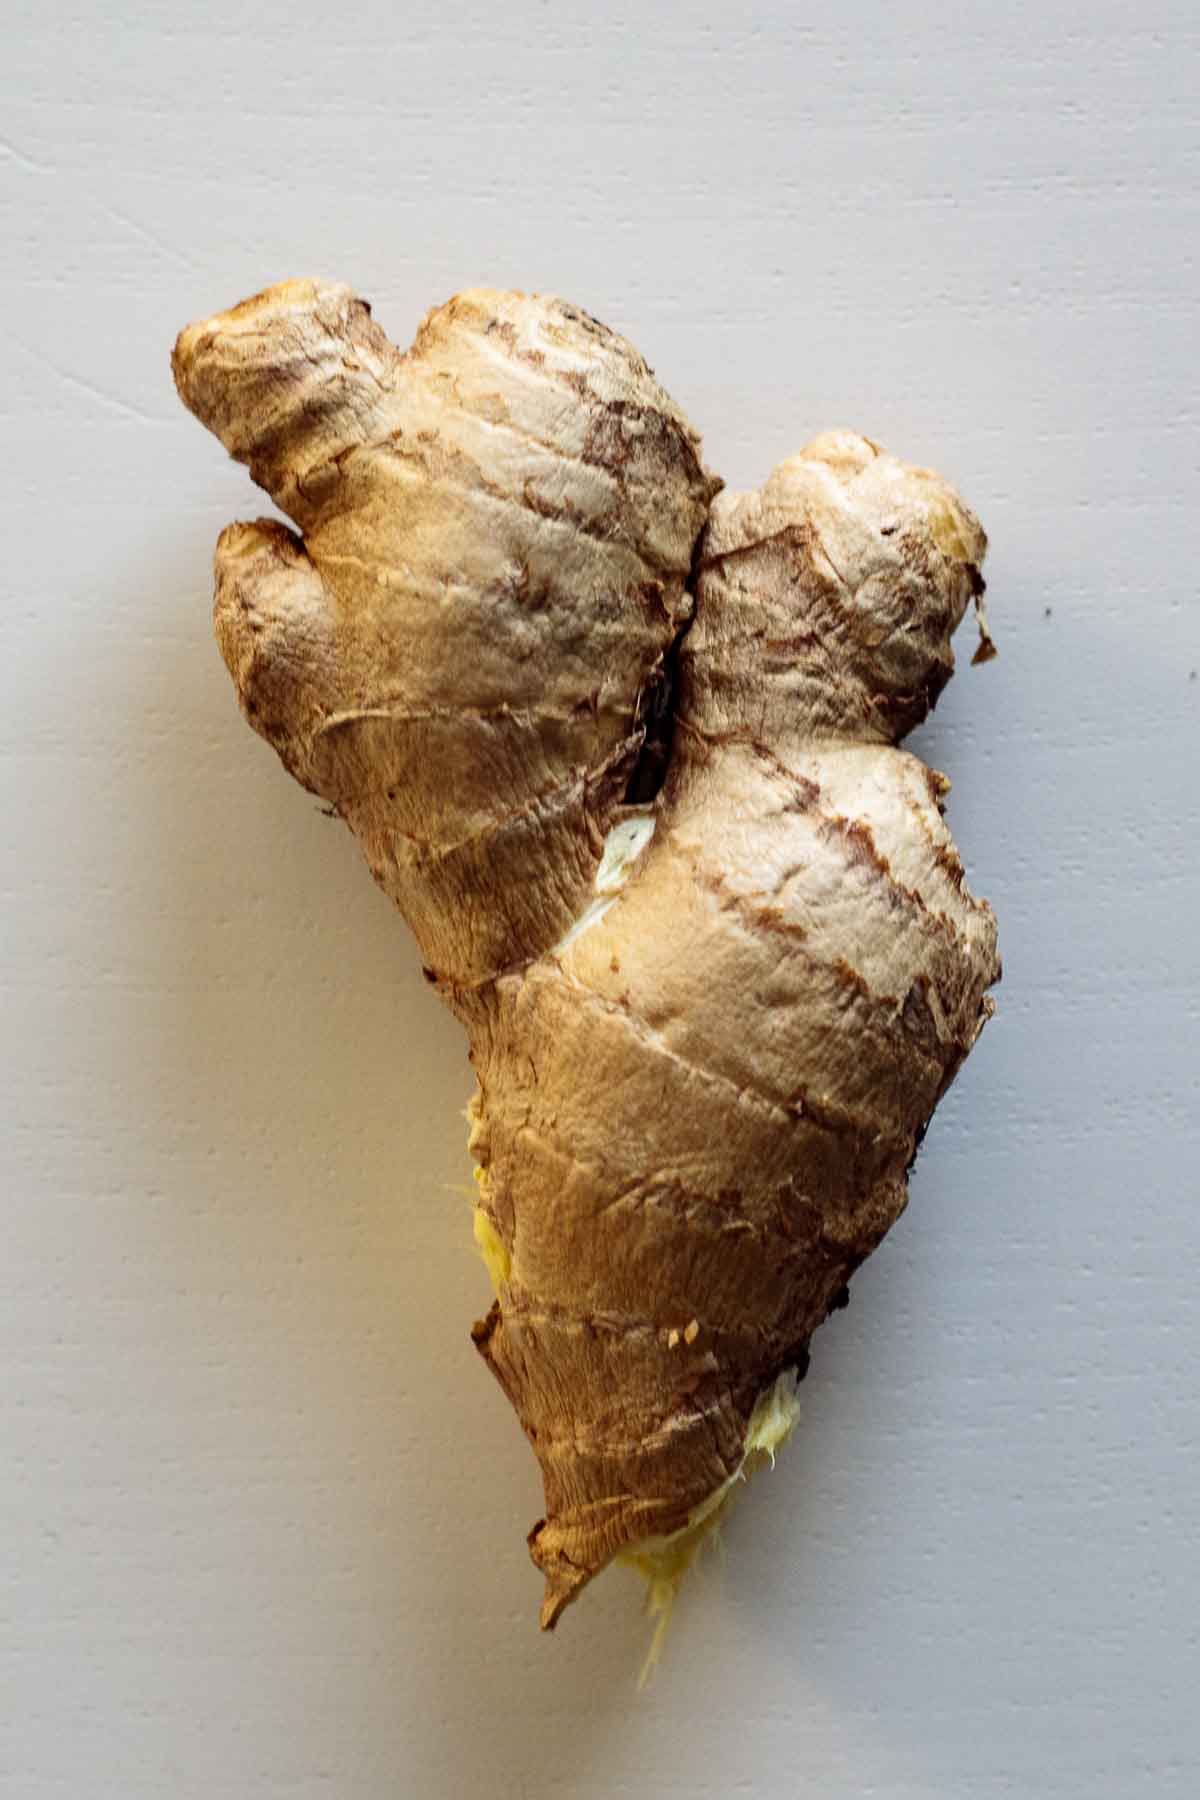 Unpeeled ginger root.